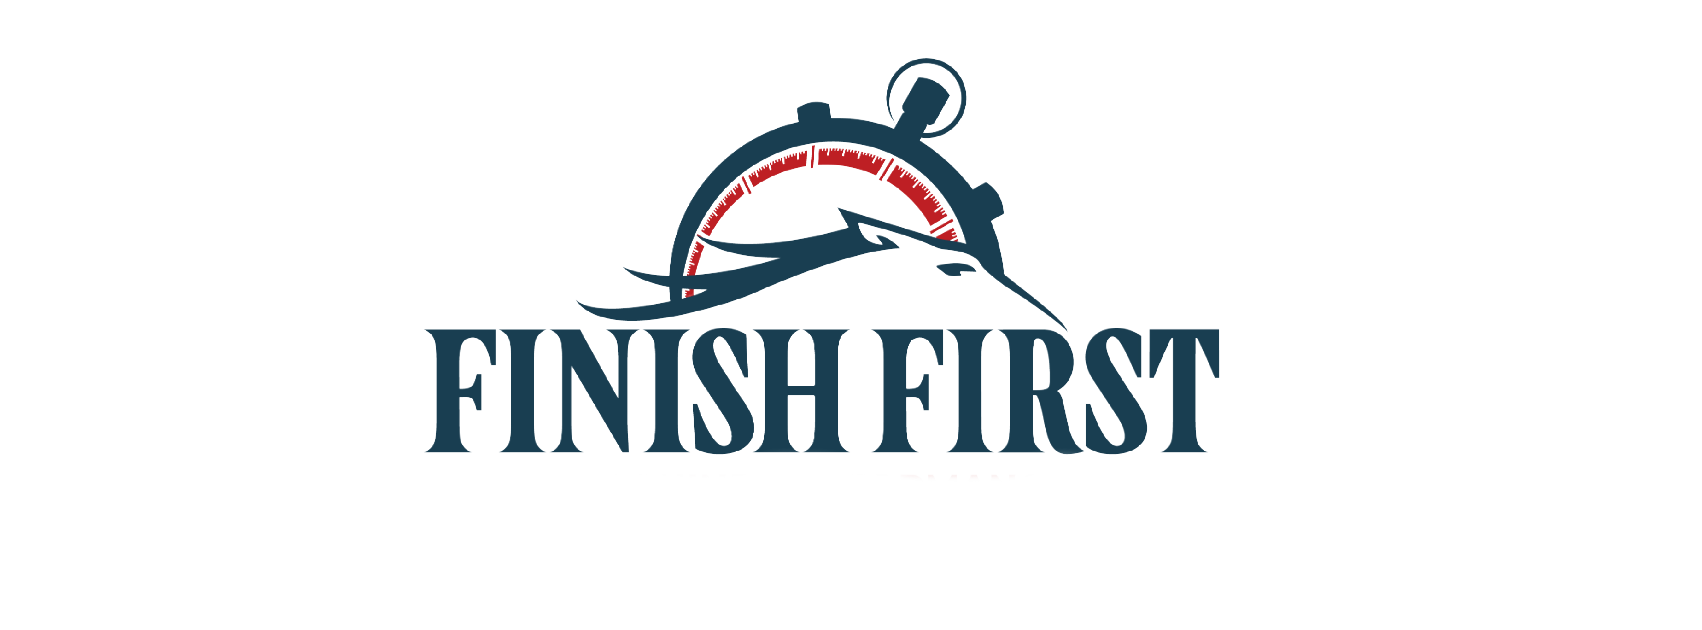 Finish First